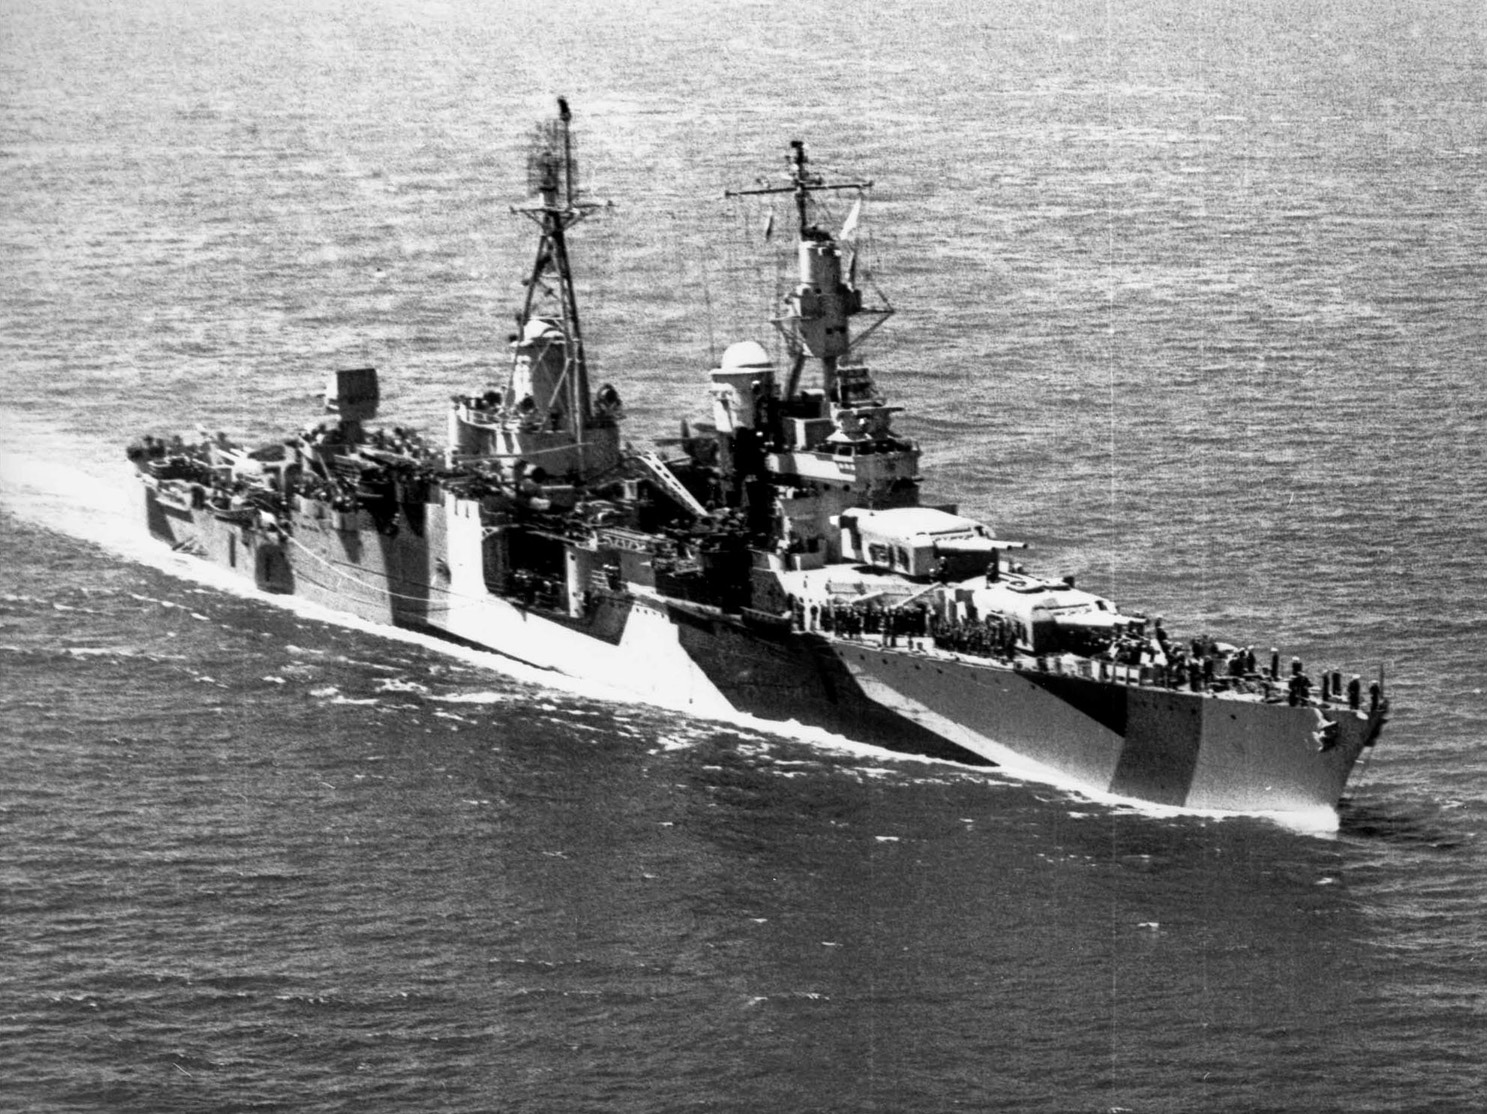 The USS Indianapolis, photographed in 1944 after an overhaul and a new dazzle paint scheme.